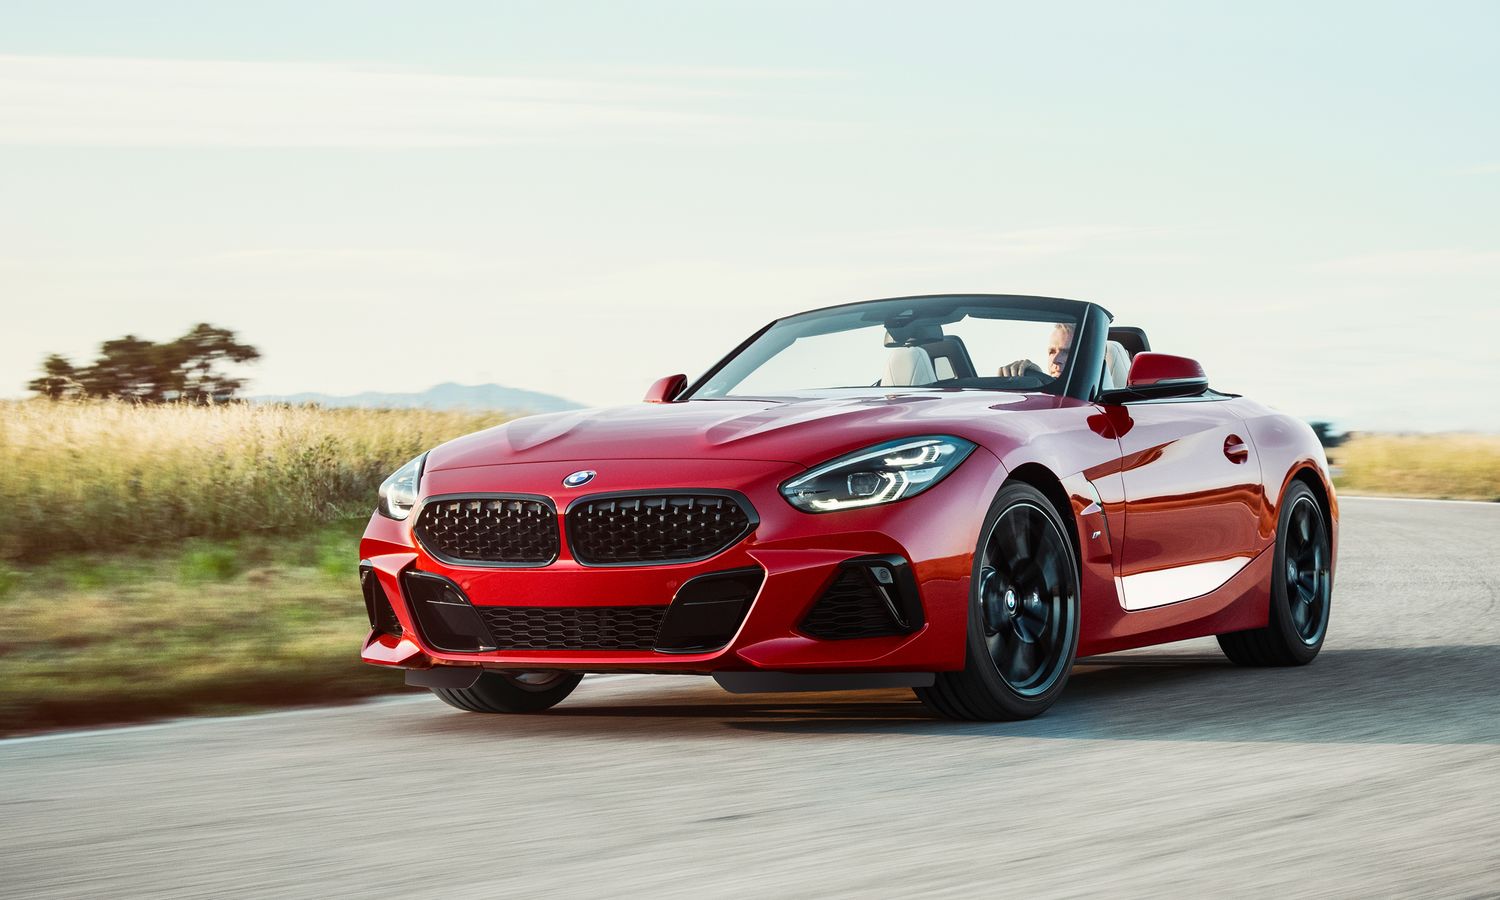 BMW pulled back the covers on its all-new Z4 coupe overnight at Monterey Car Week, aka Pebble Beach.